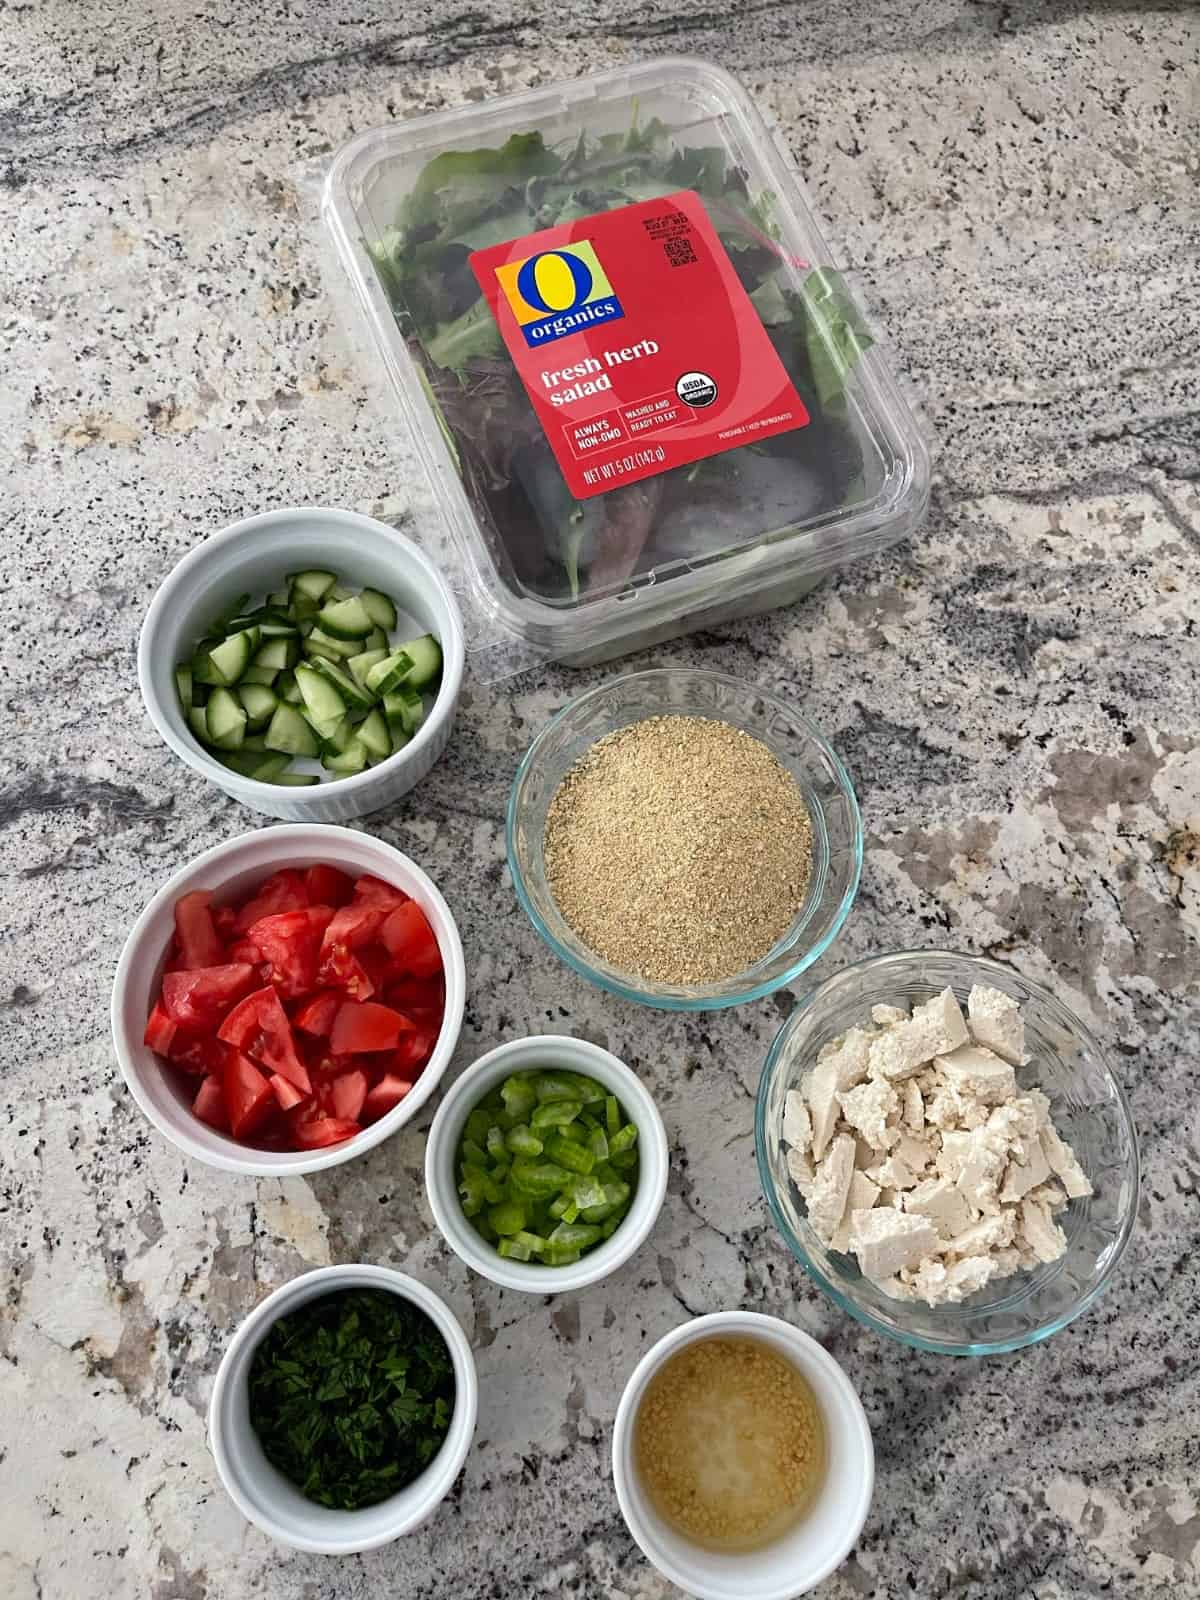 Ingredients included package of mixed salad greens, chopped cucumber, chopped tomato, chopped celery, chopped Italian parsley, minced garlic, crumbled tofu and dry falafel mix on granite.